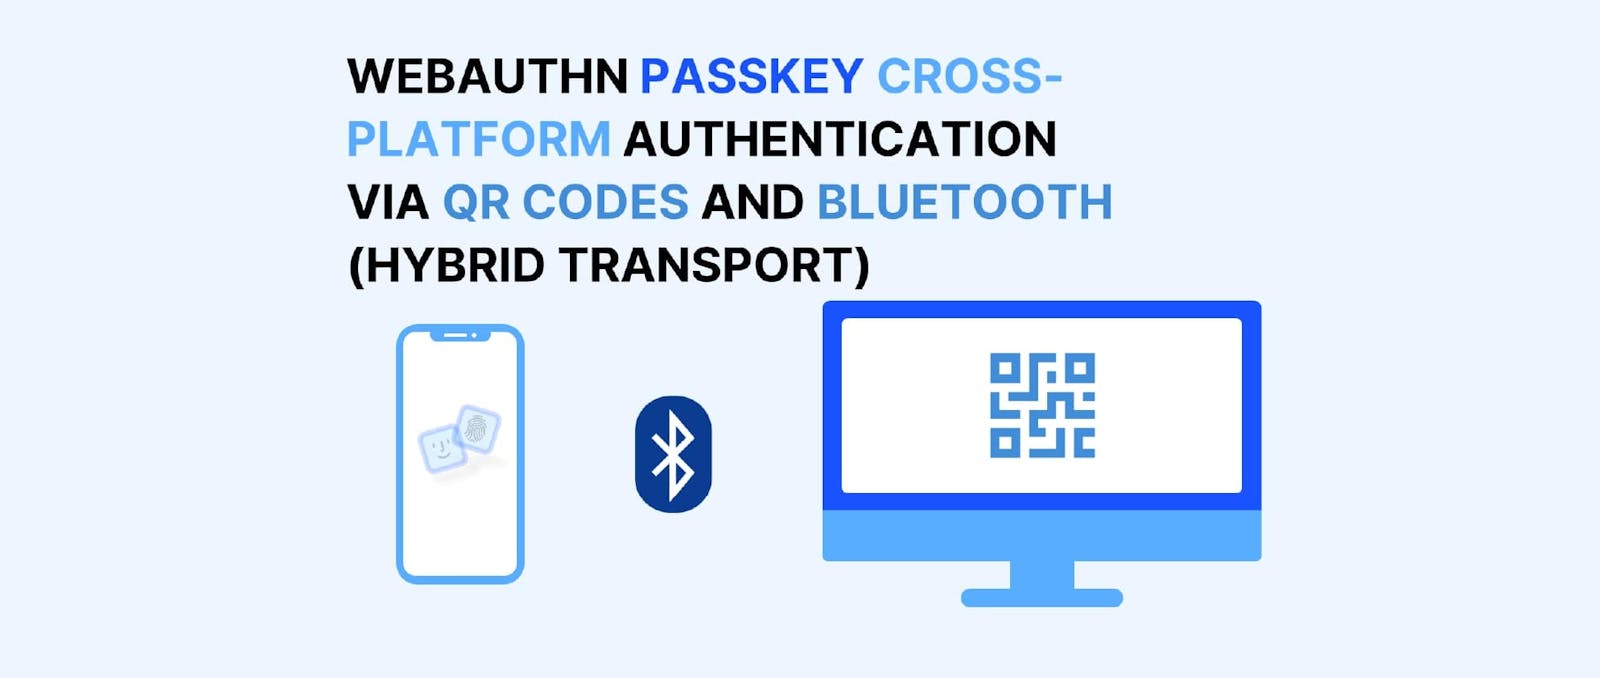 Passkeys Bluetooth: Cross-Platform Authentication with QR Codes and Bluetooth